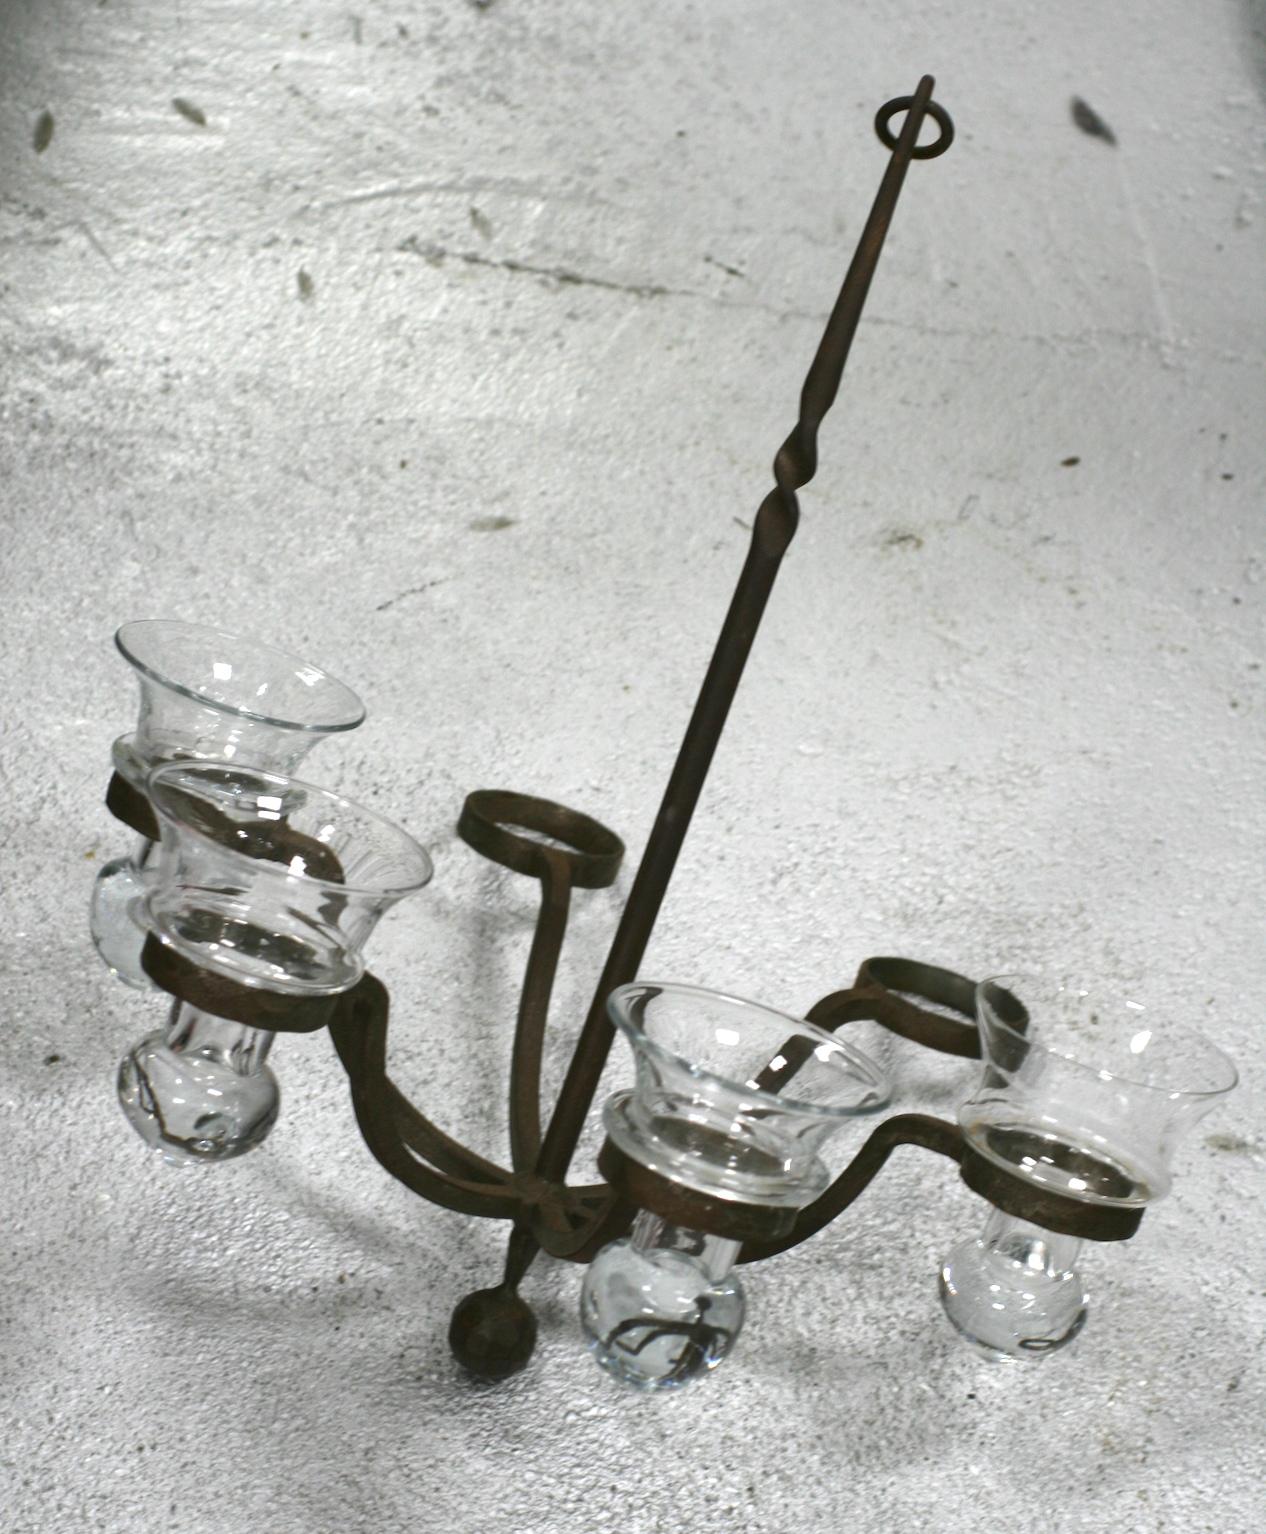 Elegant iron chandelier for Air Ferns or Votives with additional iron link stations for extending length. Each of the 6 glass holders can hold either a candle or air fern easily. Great for an enclosed porch or sun room.
21